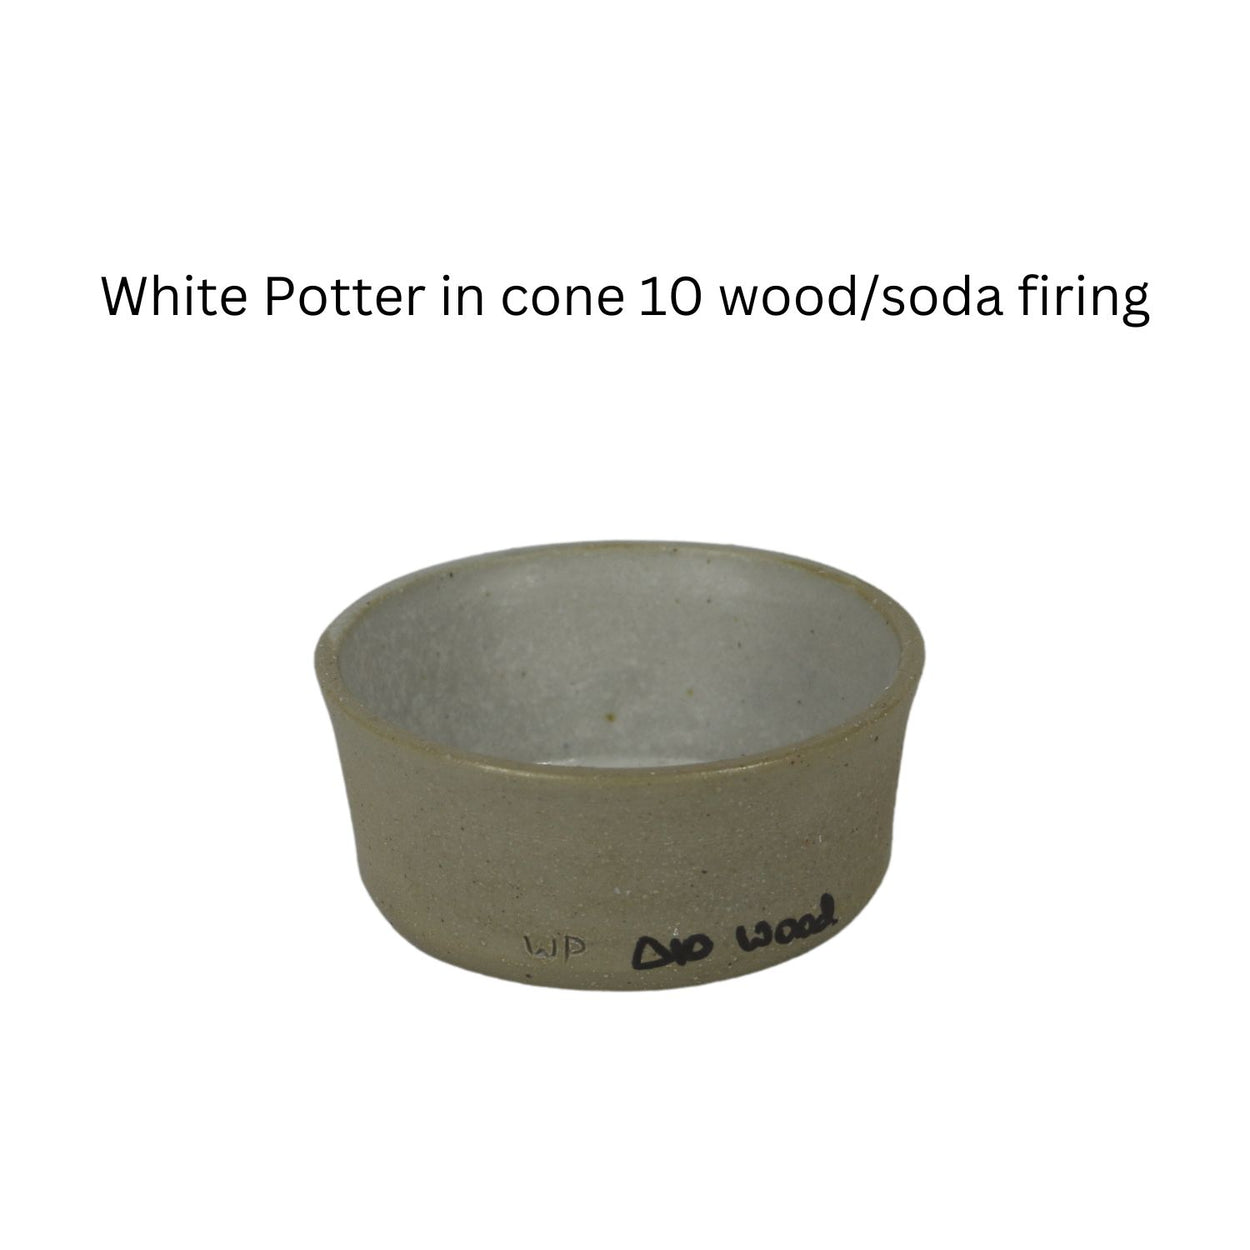 Walkers White Pottery